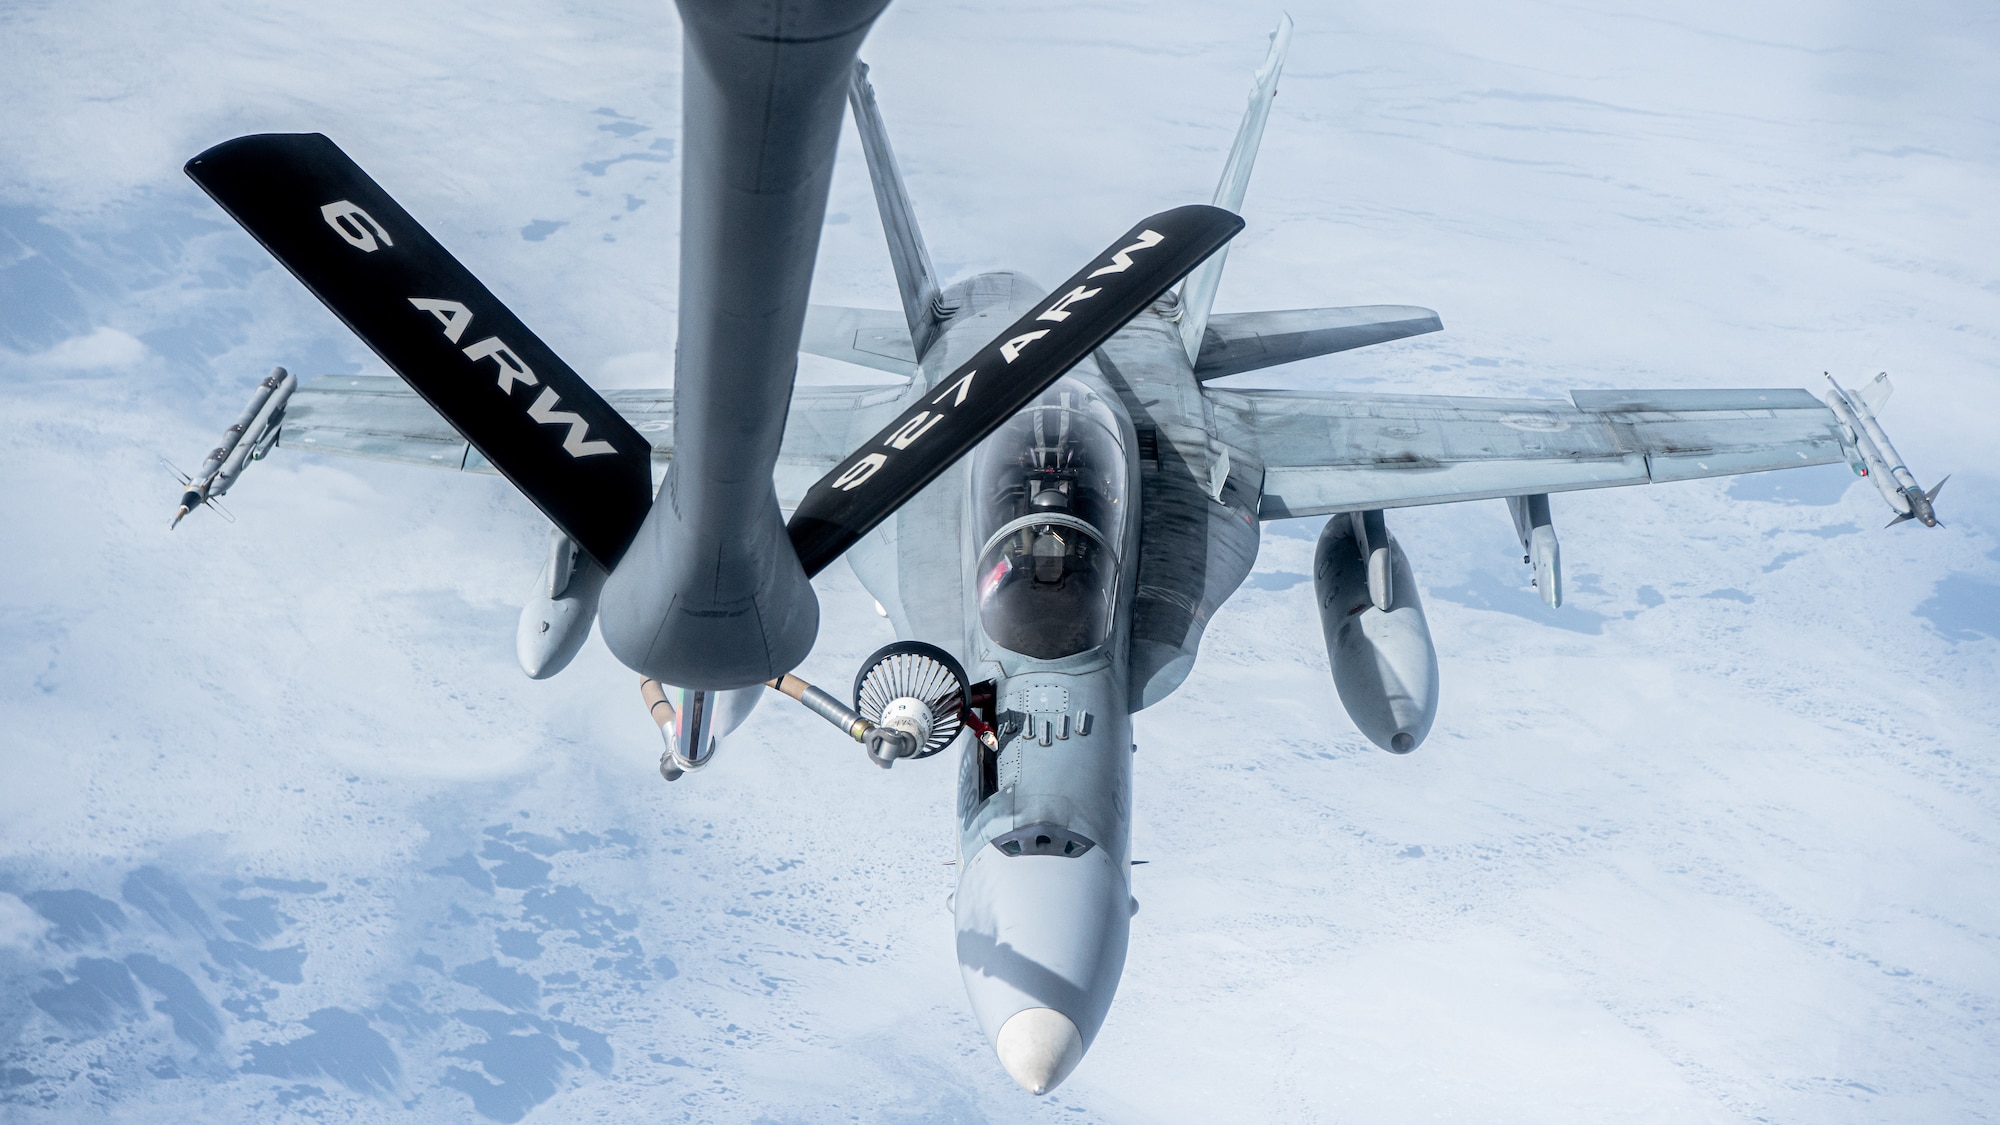 A KC-135 Stratotanker aircraft assigned to the 6th Air Refueling Wing provides aerial refueling for a CF-18 Hornet aircraft assigned to the 433rd Tactical Fighter Squadron in support of North American Aerospace Defense Command's (NORAD) Operation Noble Defender (OND), March 16, 2022.